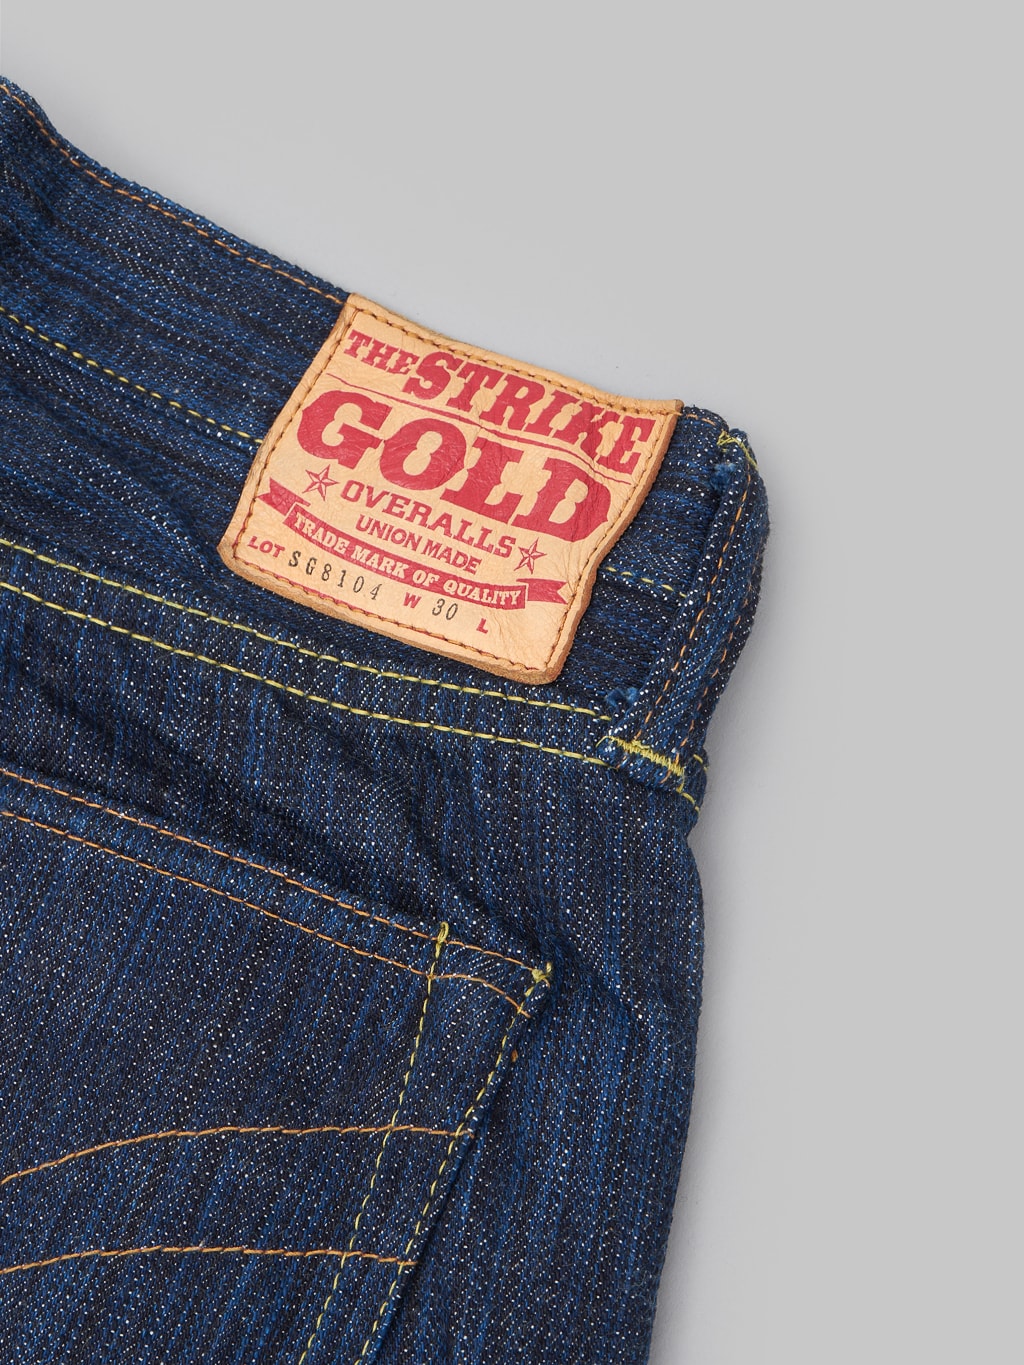 The Strike Gold 8104 Shower Slub jeans leather patch